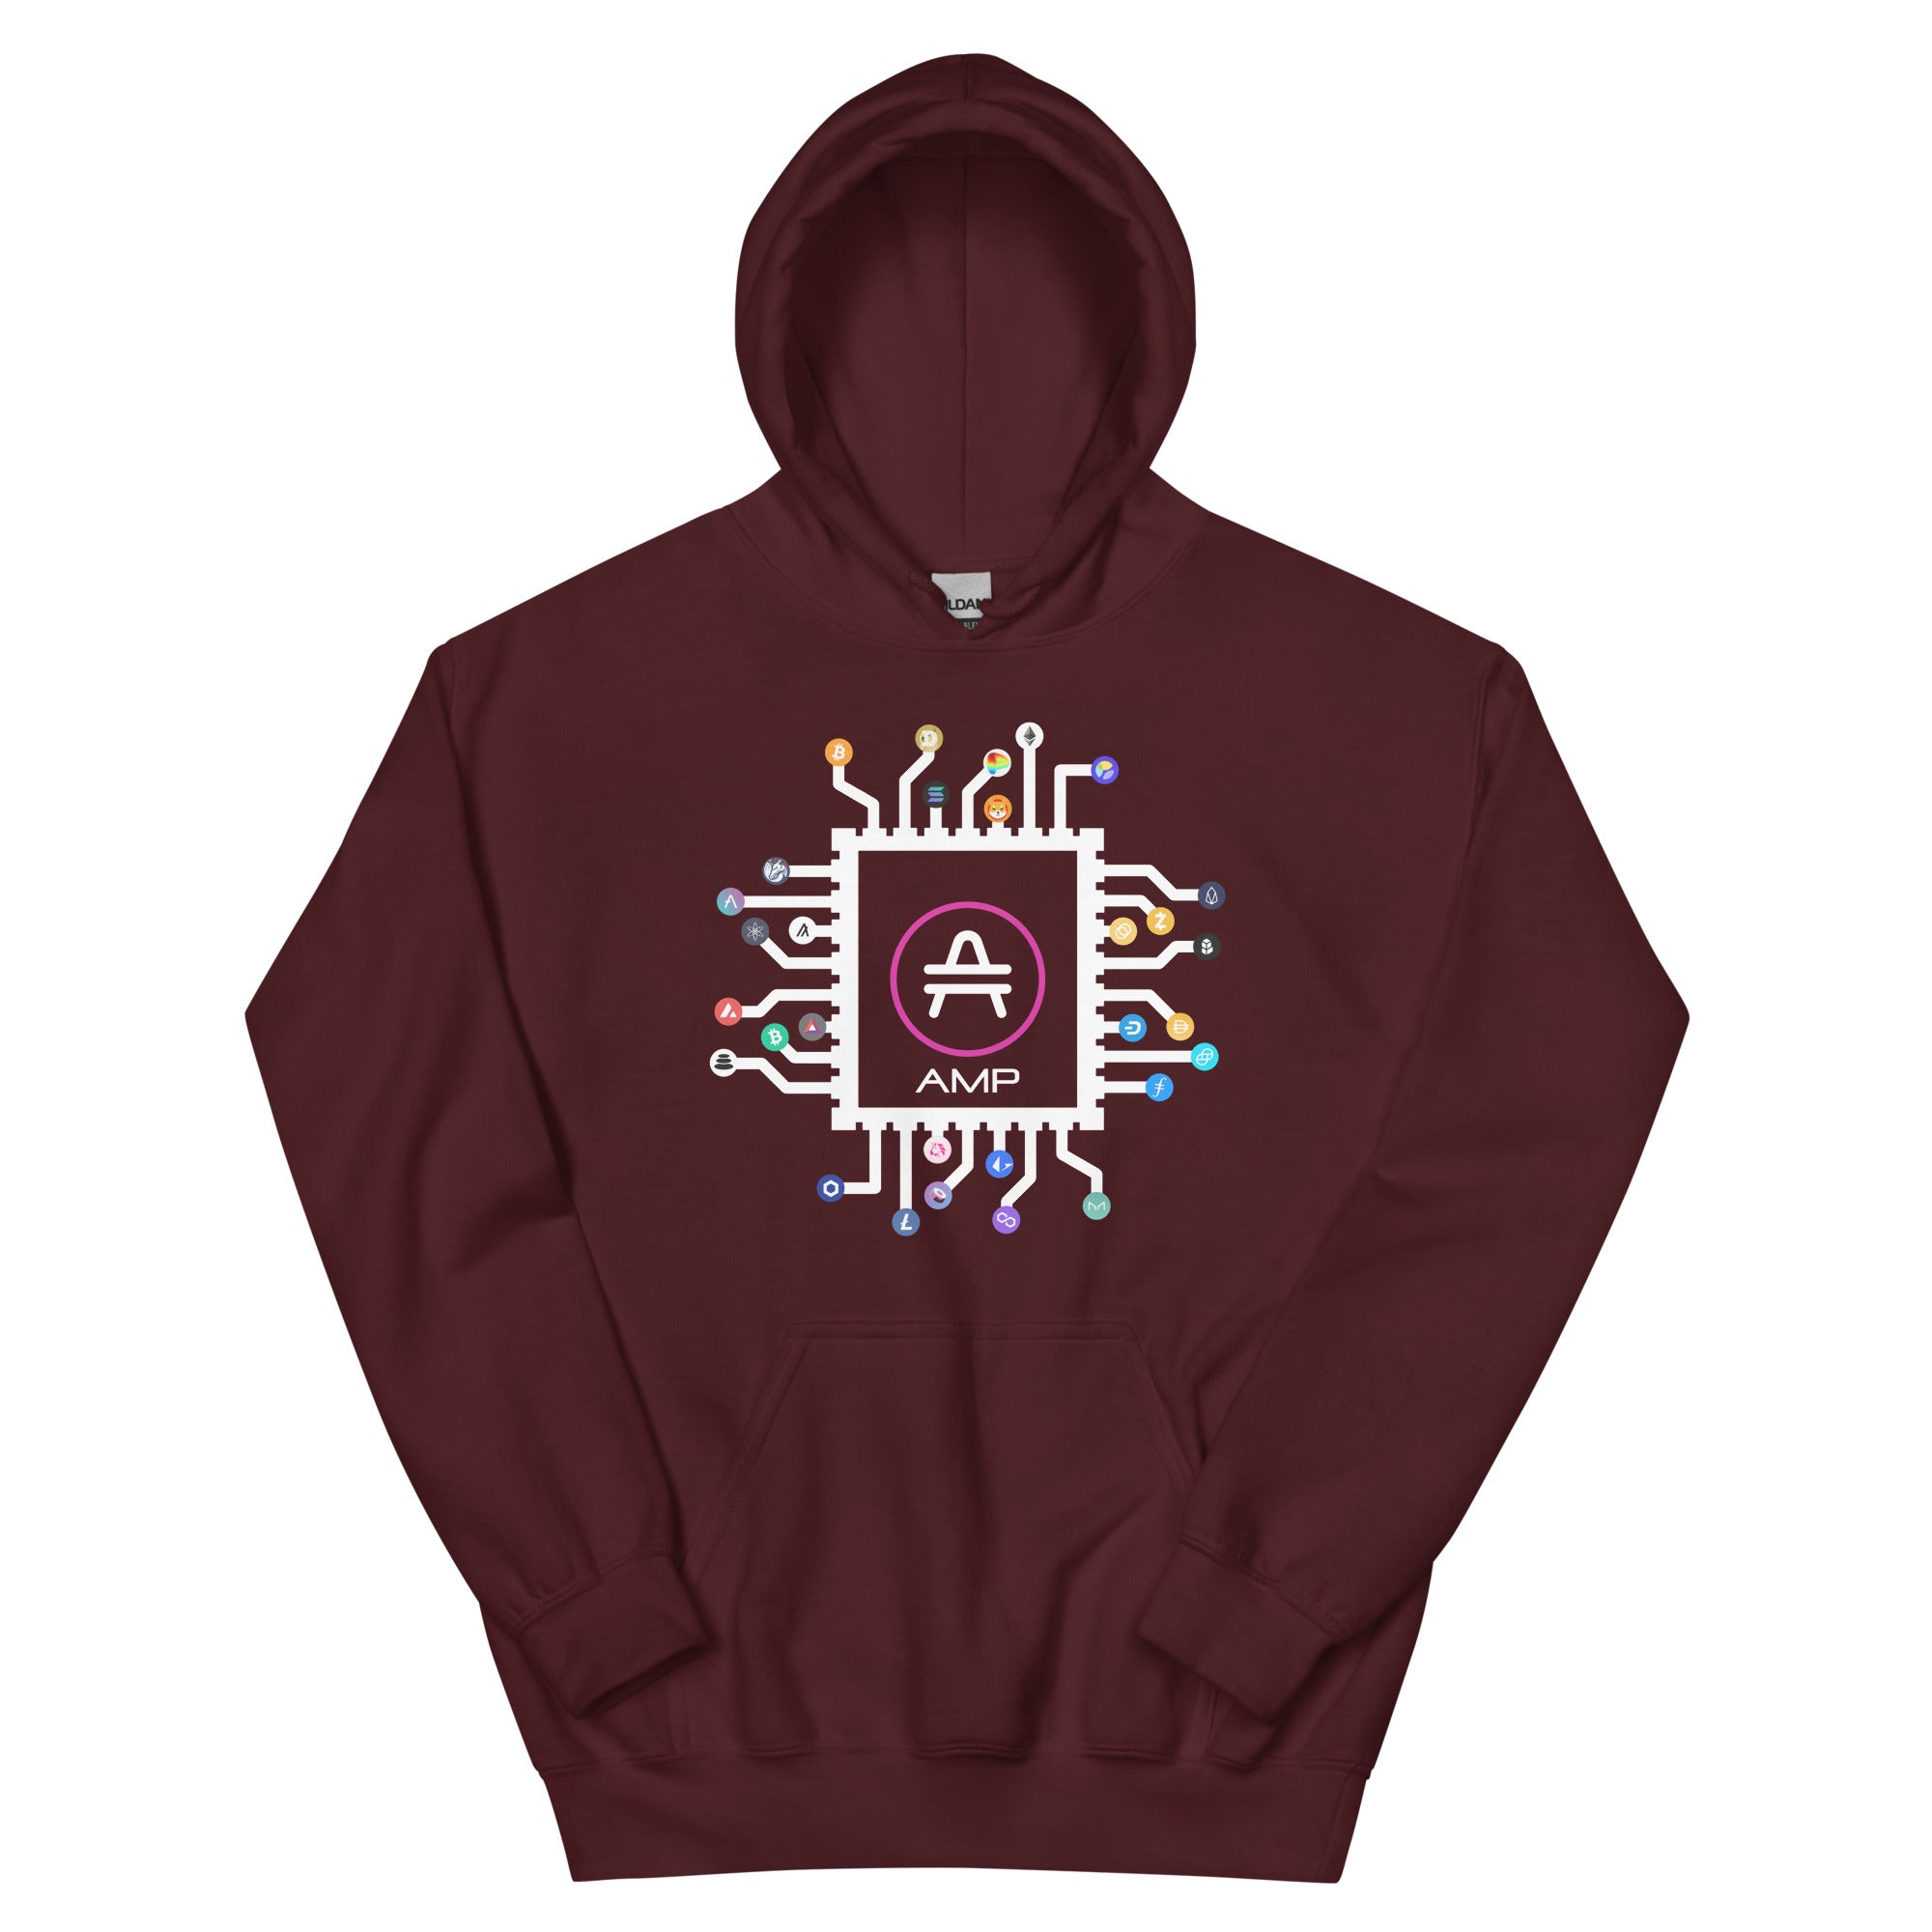 an AMP Swagg CPU hoodie in maroon